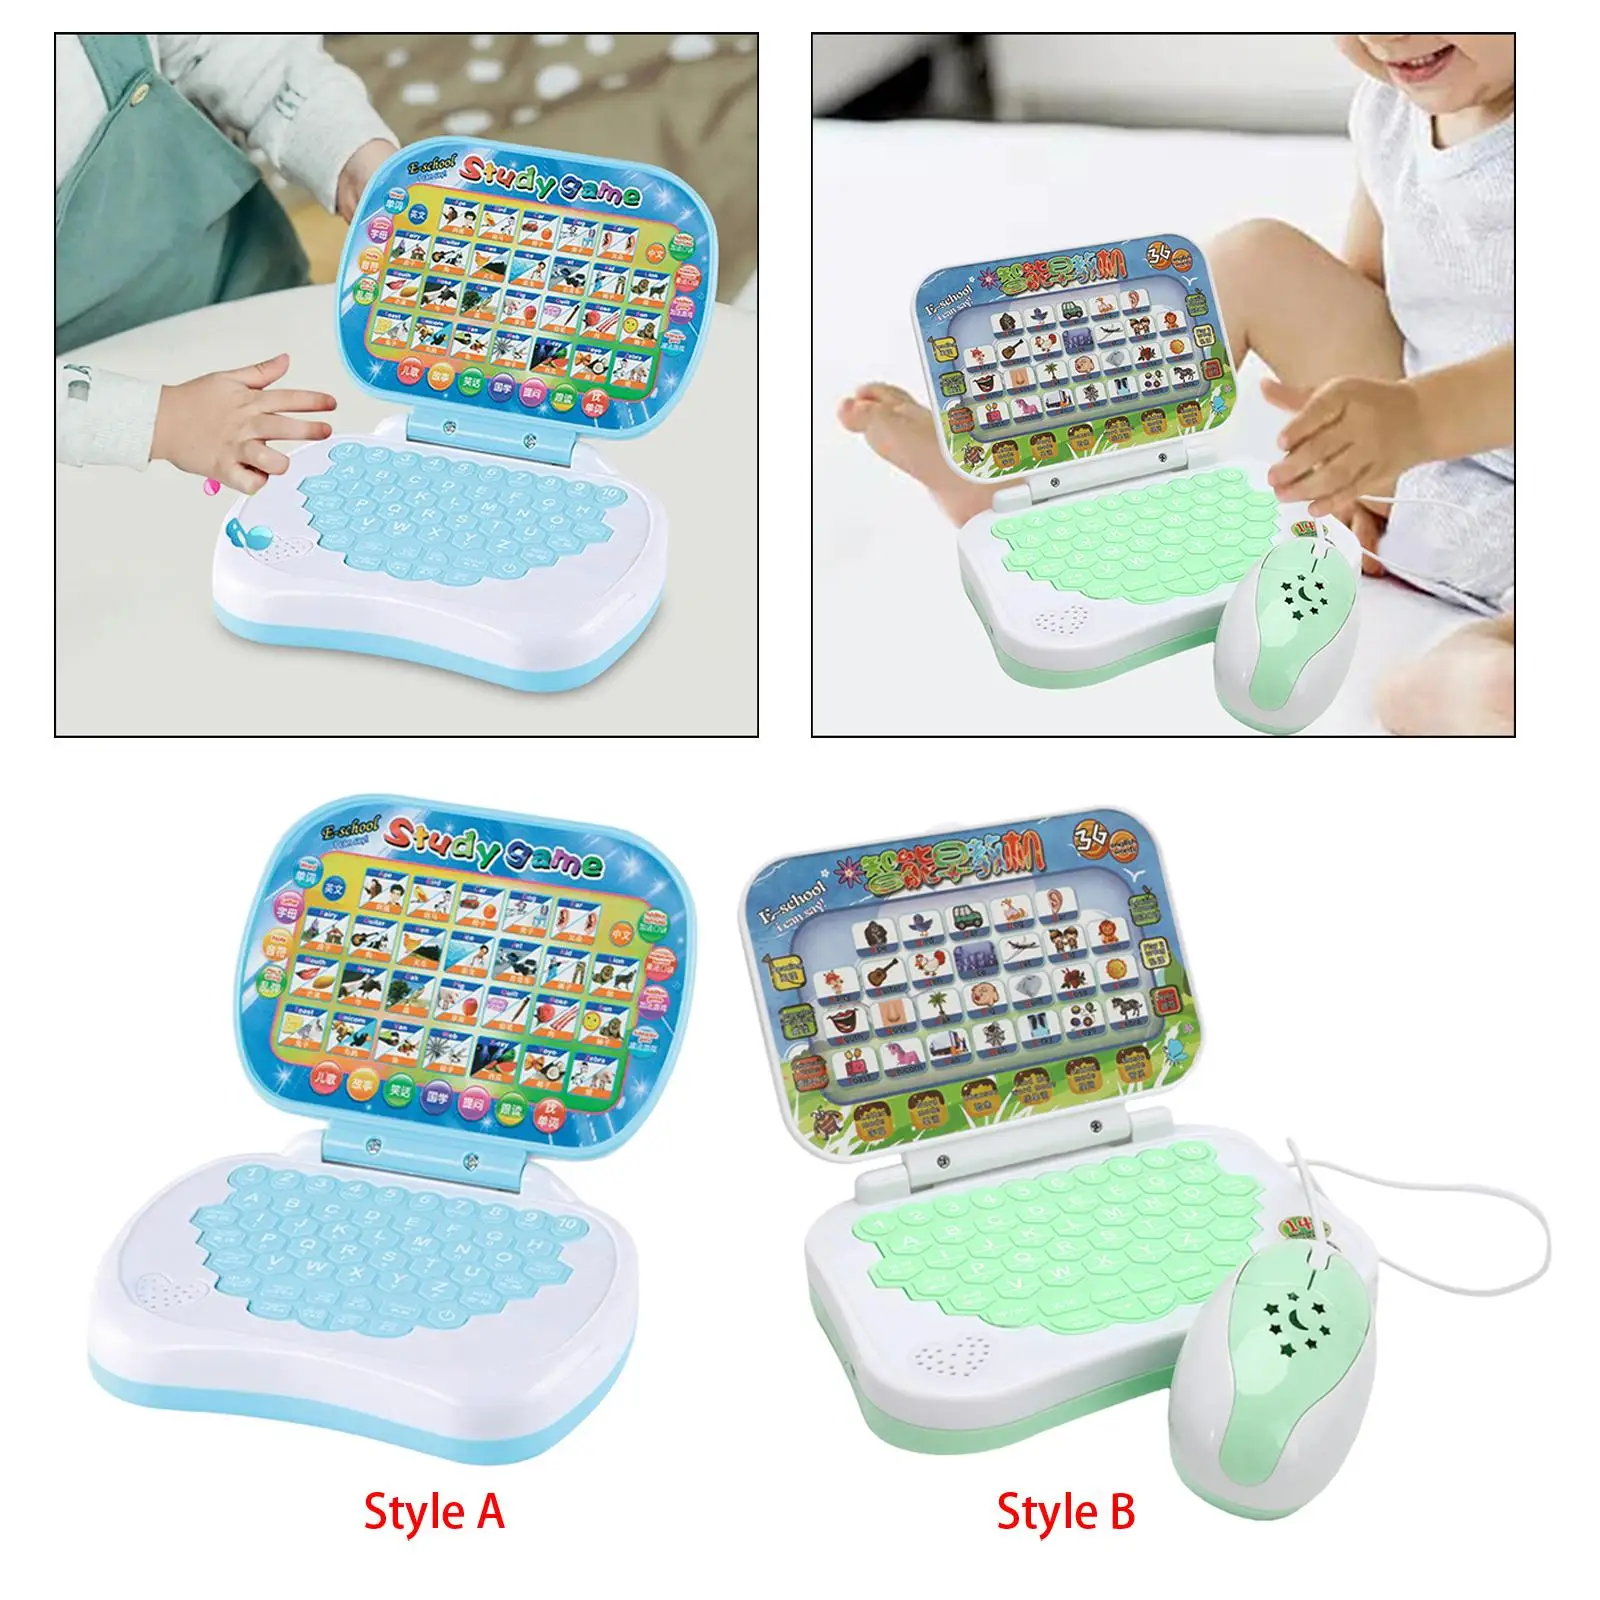 Handheld Language Learning Machine Activities Computer Early Education Kids Laptop Toy for Girls Boys Children Kids